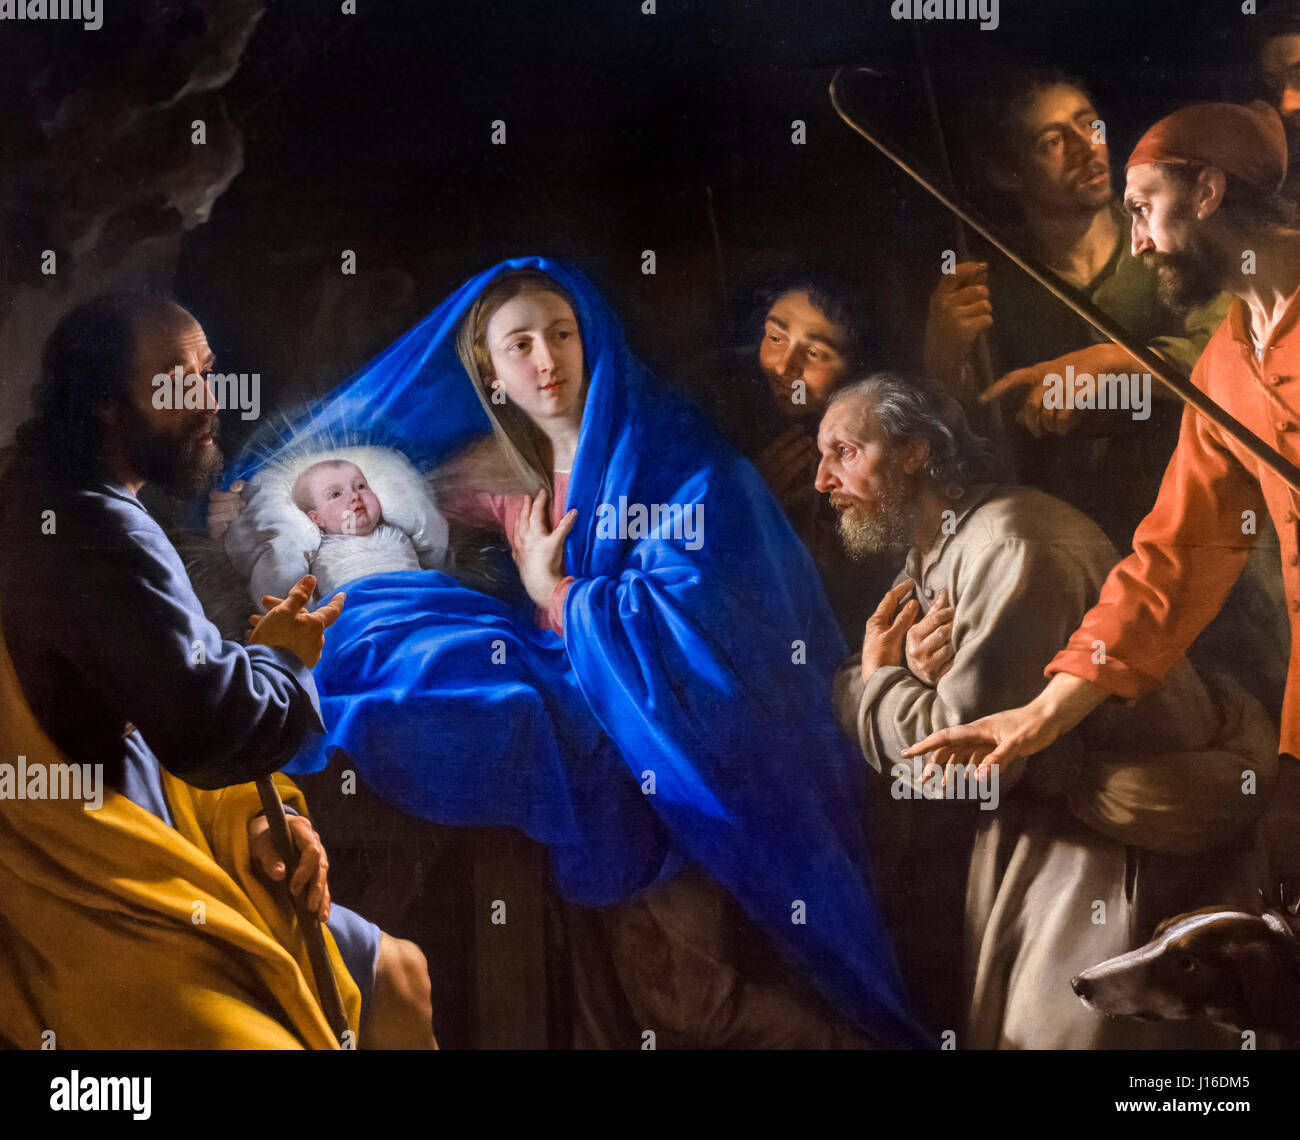 Nativity Scene. "The Adoration of the Shepherds" by Philippe de Champaigne (1602 - 1674), oil on canvas, c.1645. Detail from a larger painting J16DMC. Stock Photo